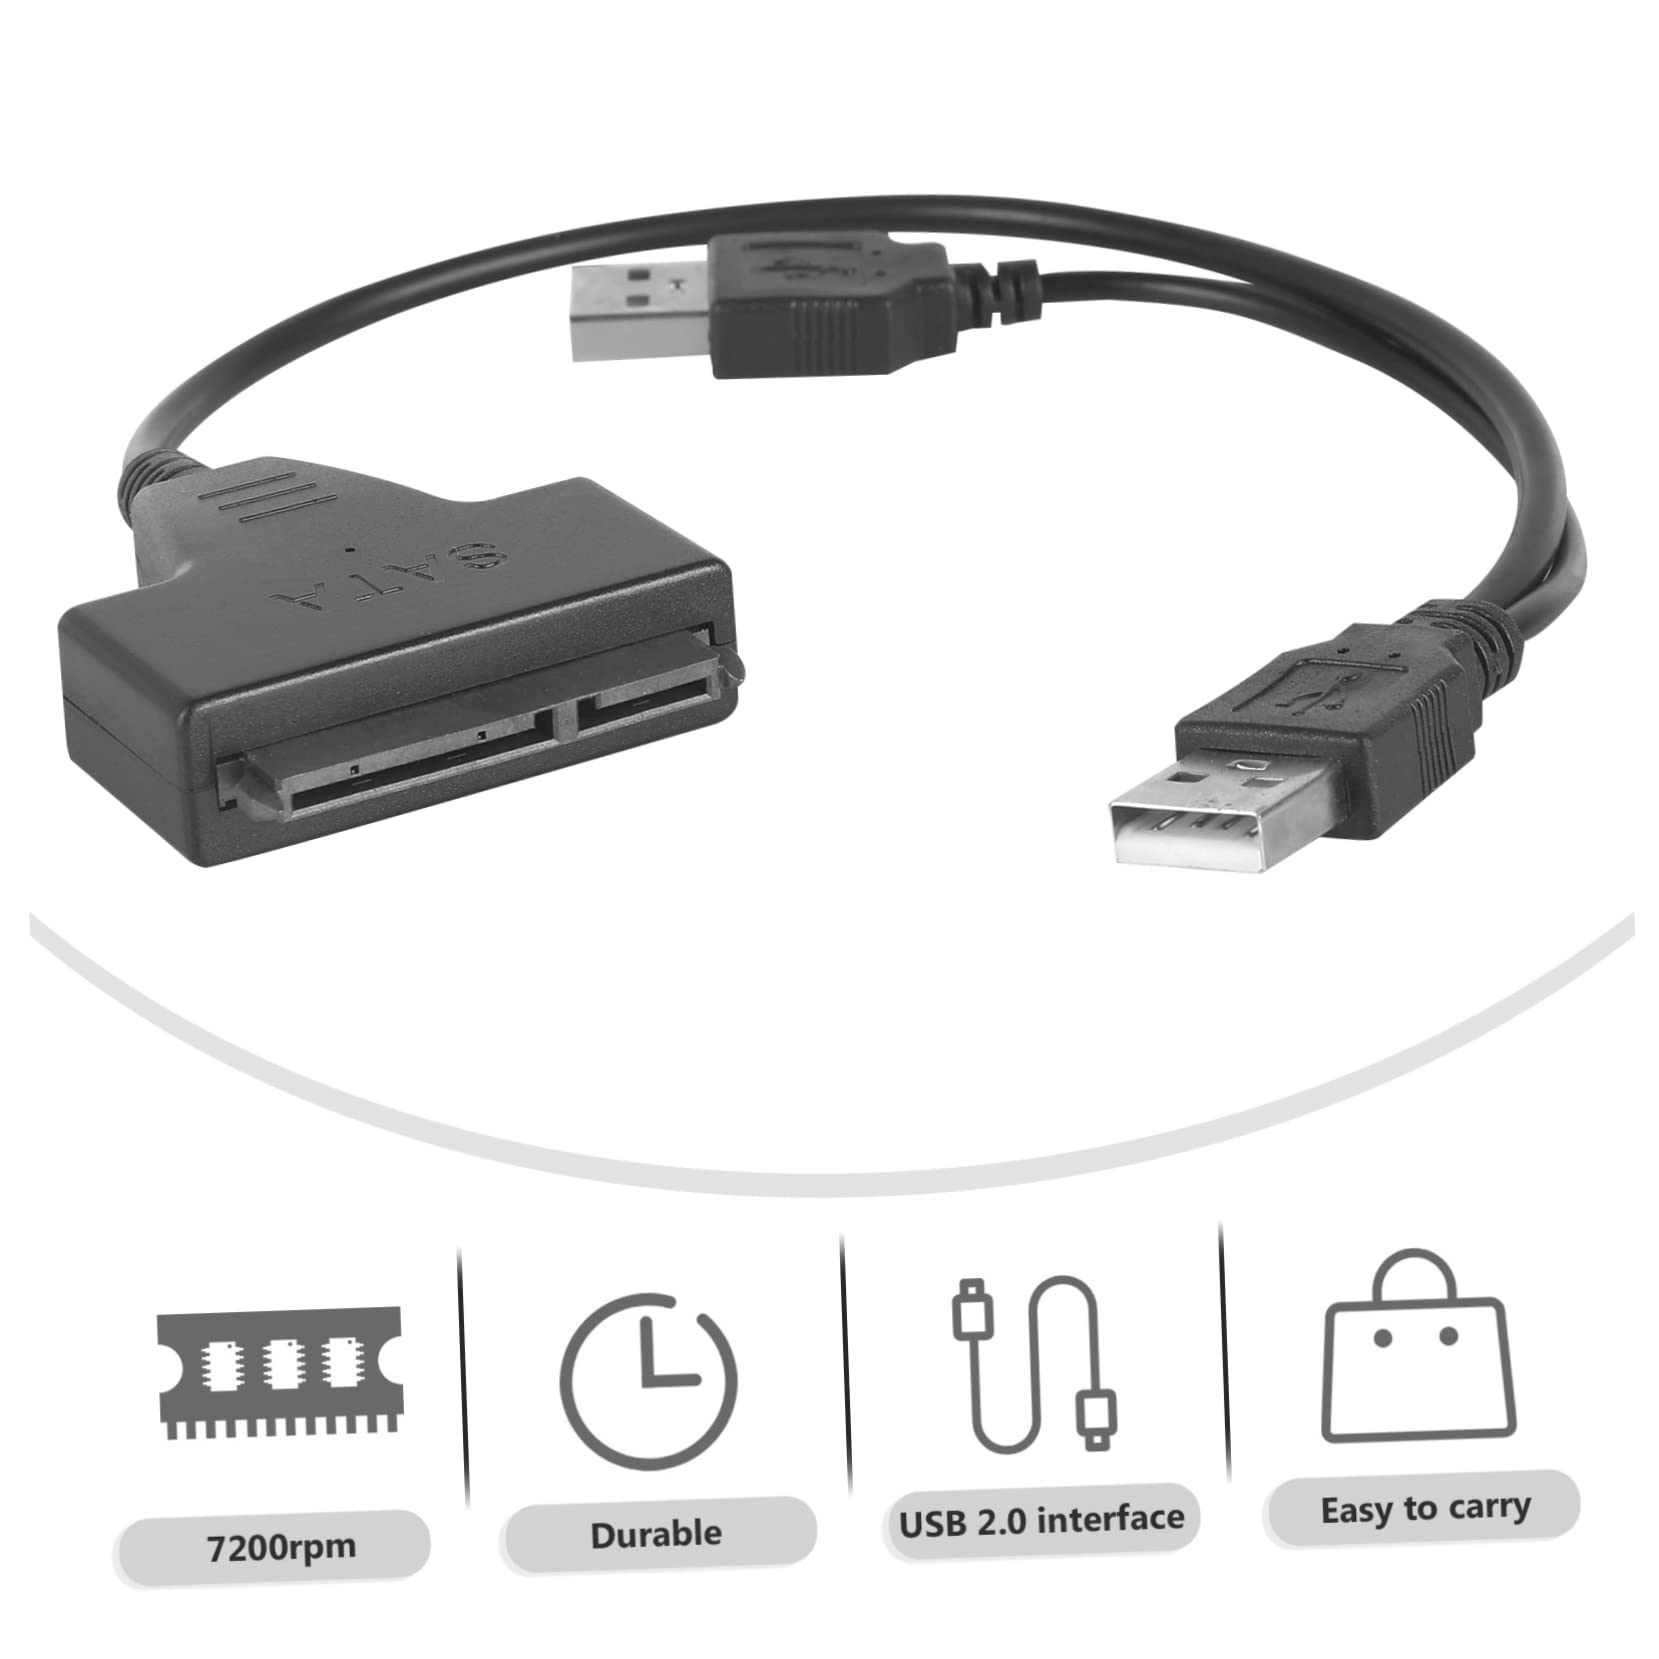 KOMBIUDA Hard Drive Cable USB to Connector Adapter USB Cables Laptop Hard Drive USB connectors USB to Wire USB to 3. 5 USB to Data Line to USB Cable USB a Cable Hard Disk Converter Copper